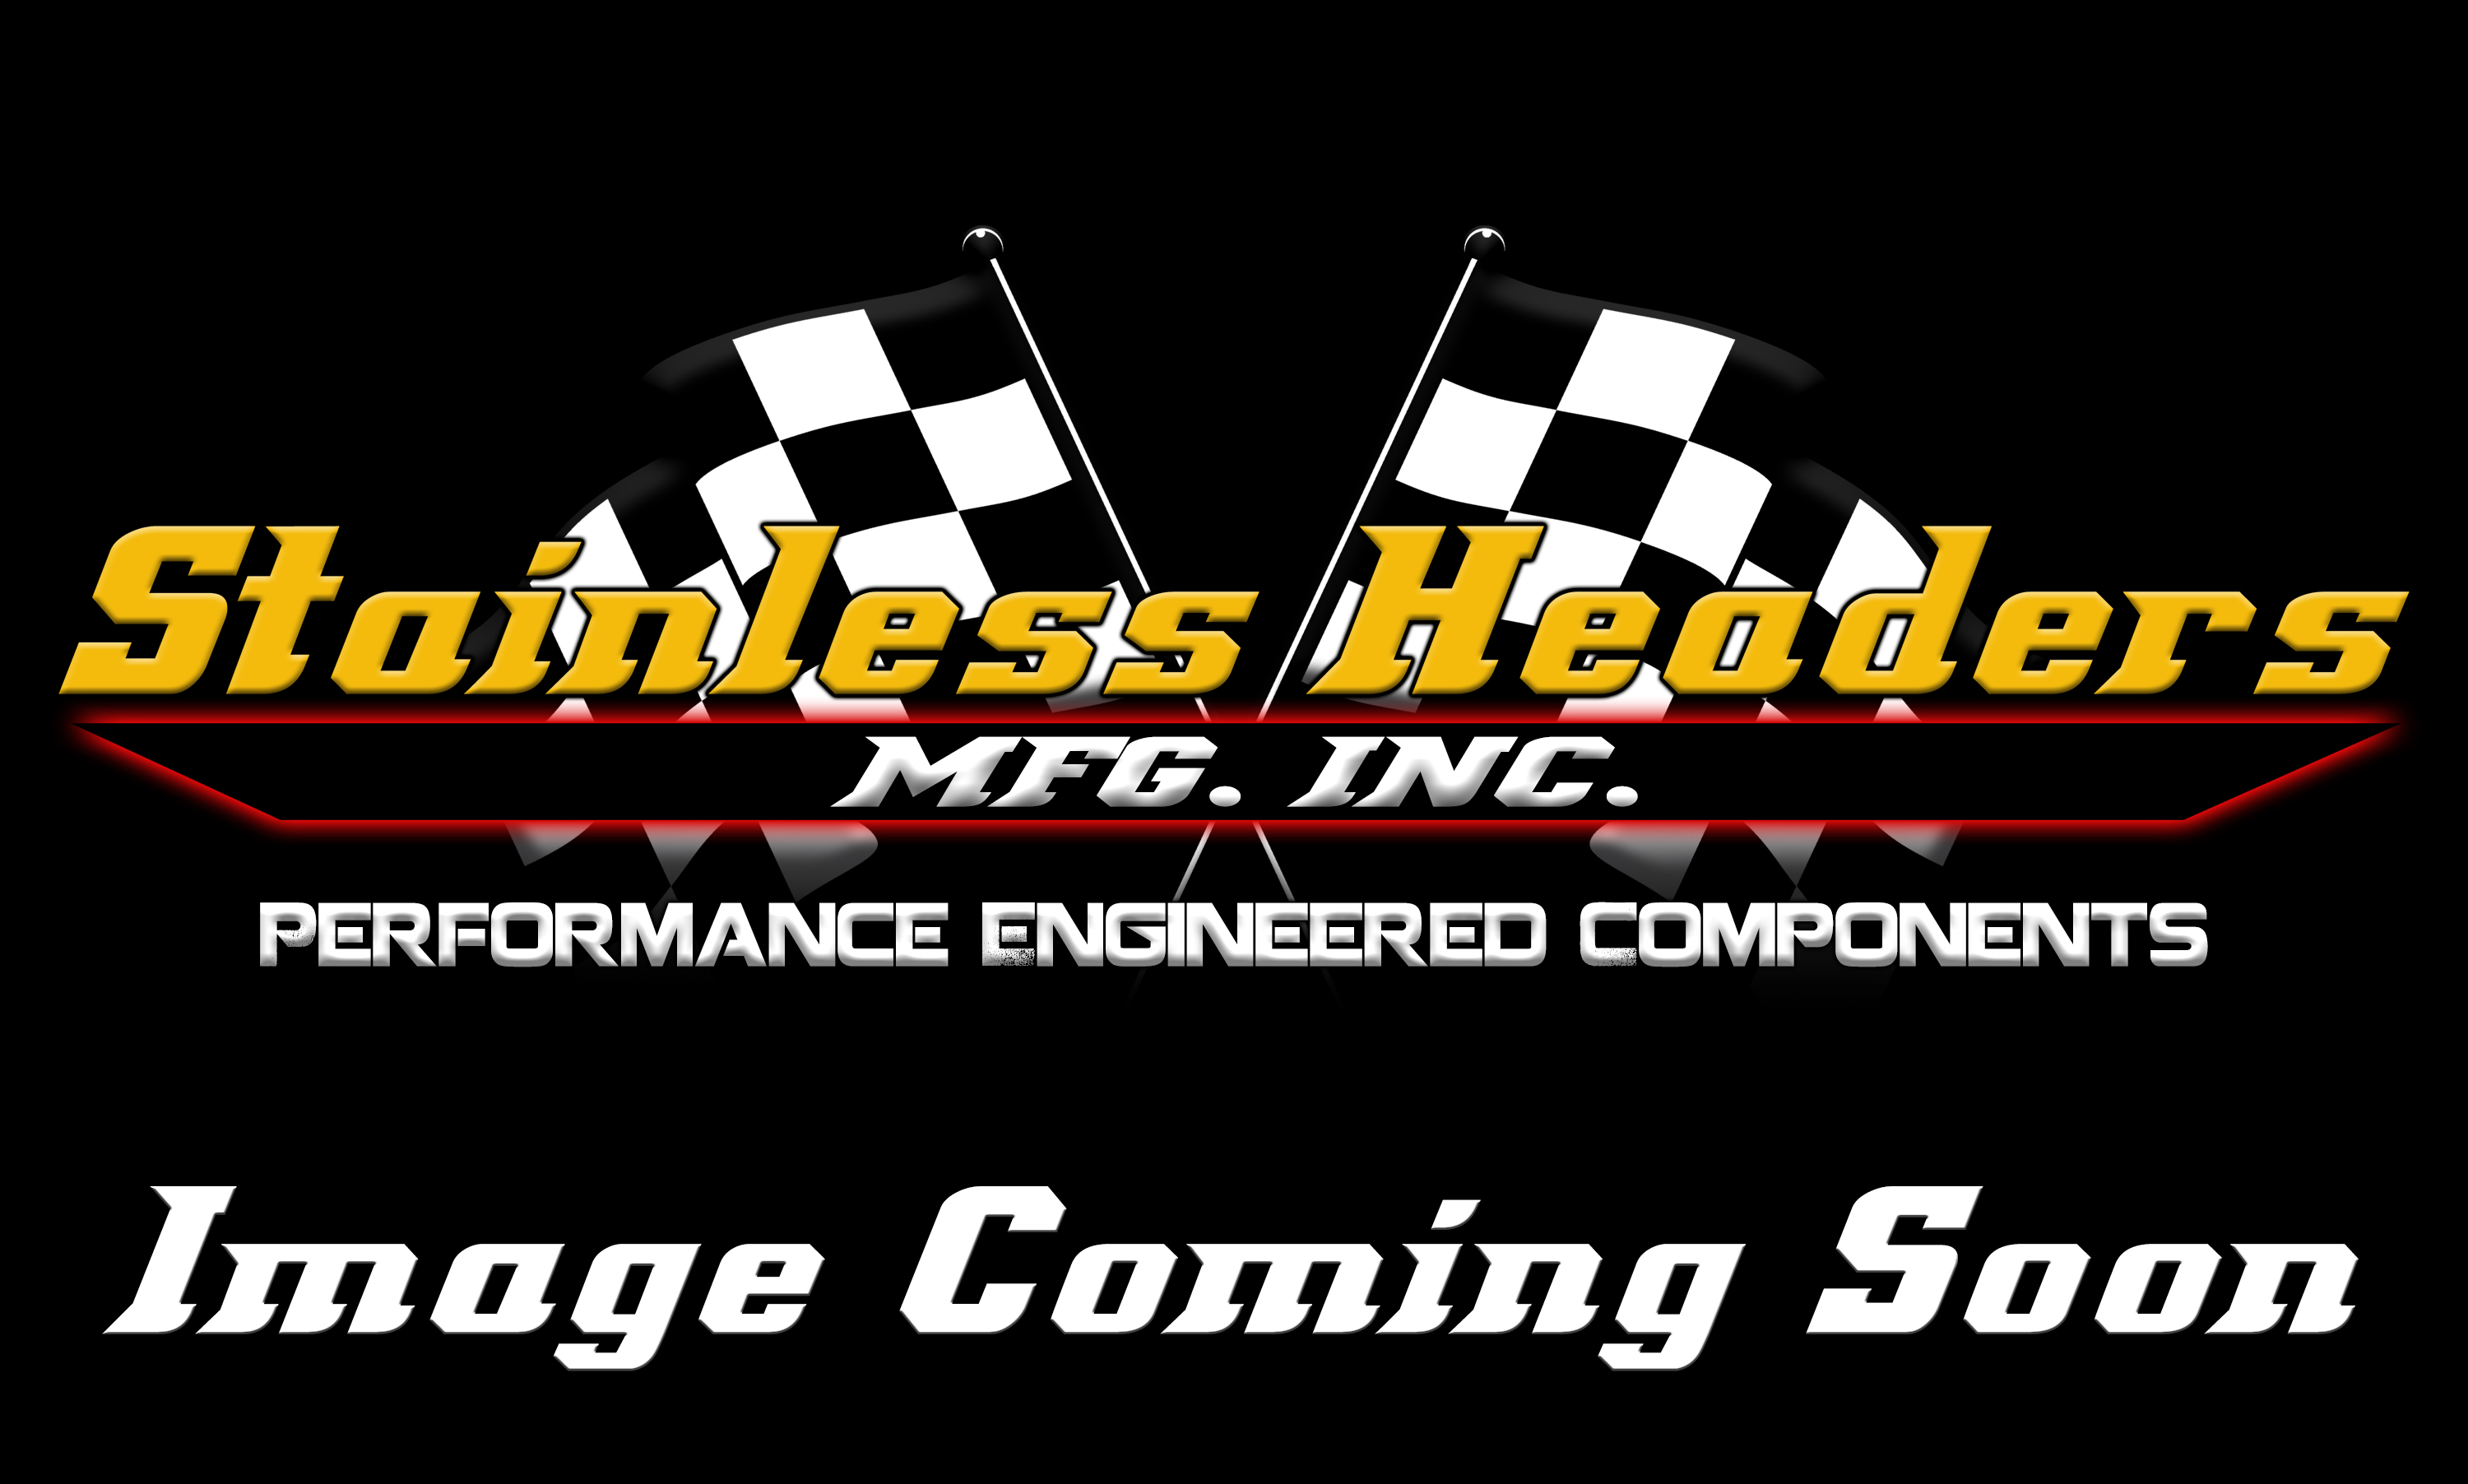 CompTurbo Technology Turbochargers - Comp Turbo Journal Bearing Turbochargers - CompTurbo Technologies - CTR4208H-7880 360 Journal Bearing Turbocharger (1300 HP)